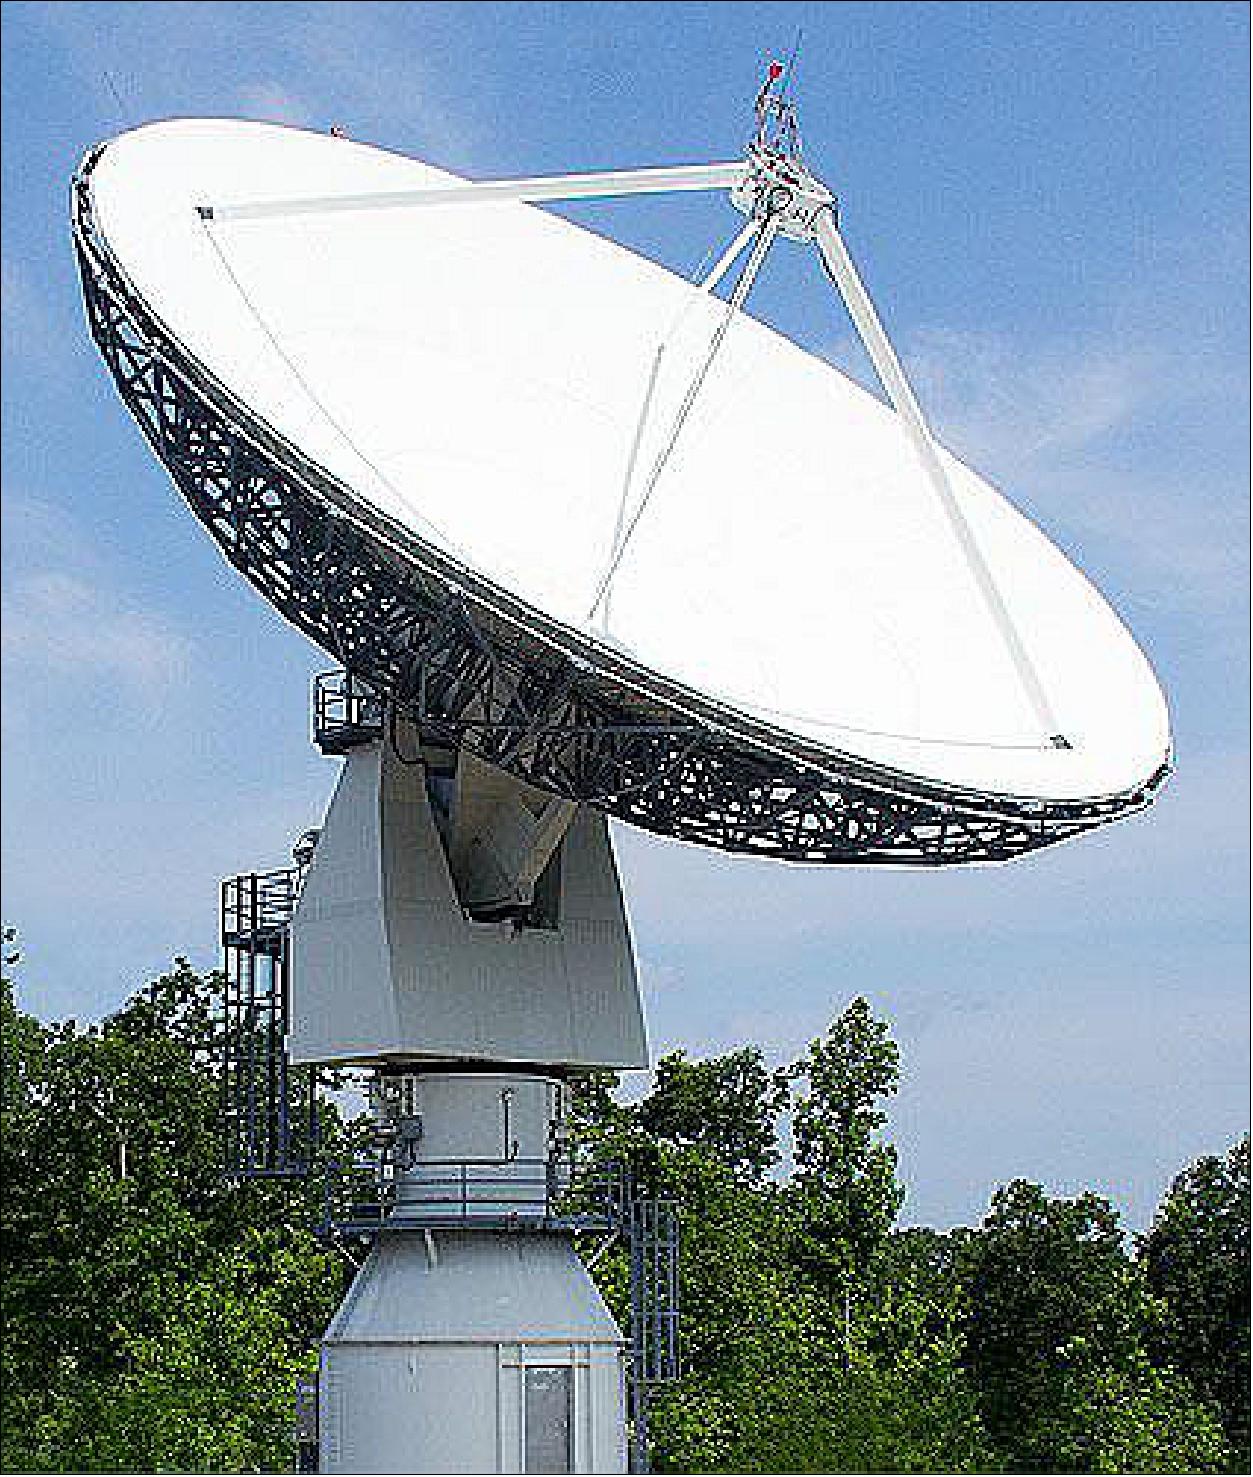 Figure 6: Photo of the 21m antenna at Morehead State University (image credit: Morehead State University Space Science Center)